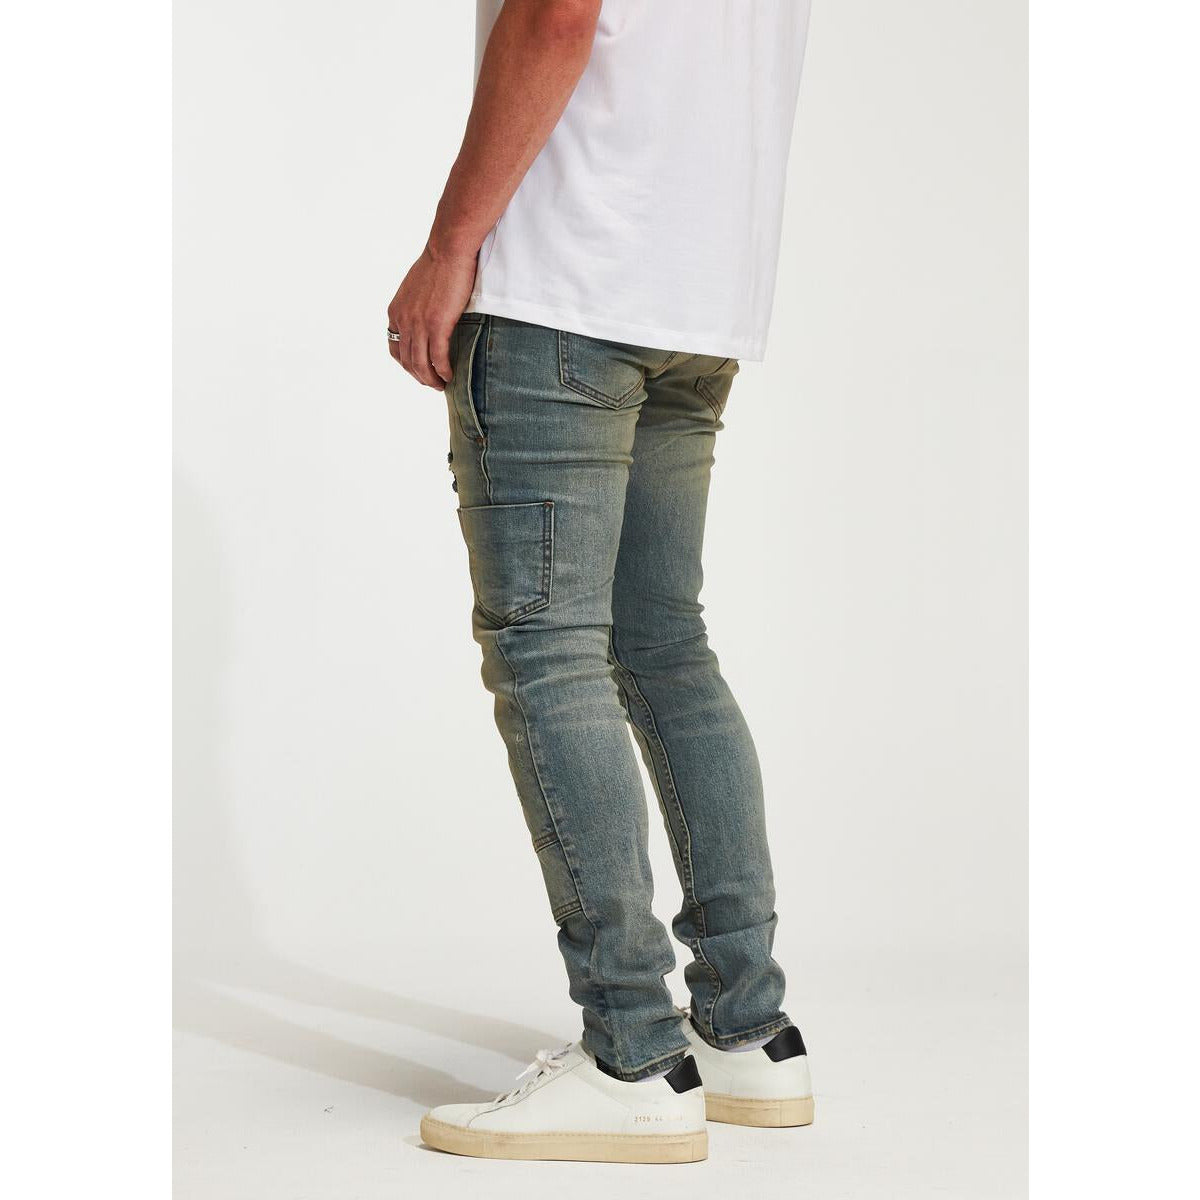 Embellish Hart 2.0 Ripped Sand Blue Jeans (EMBSP123-2)